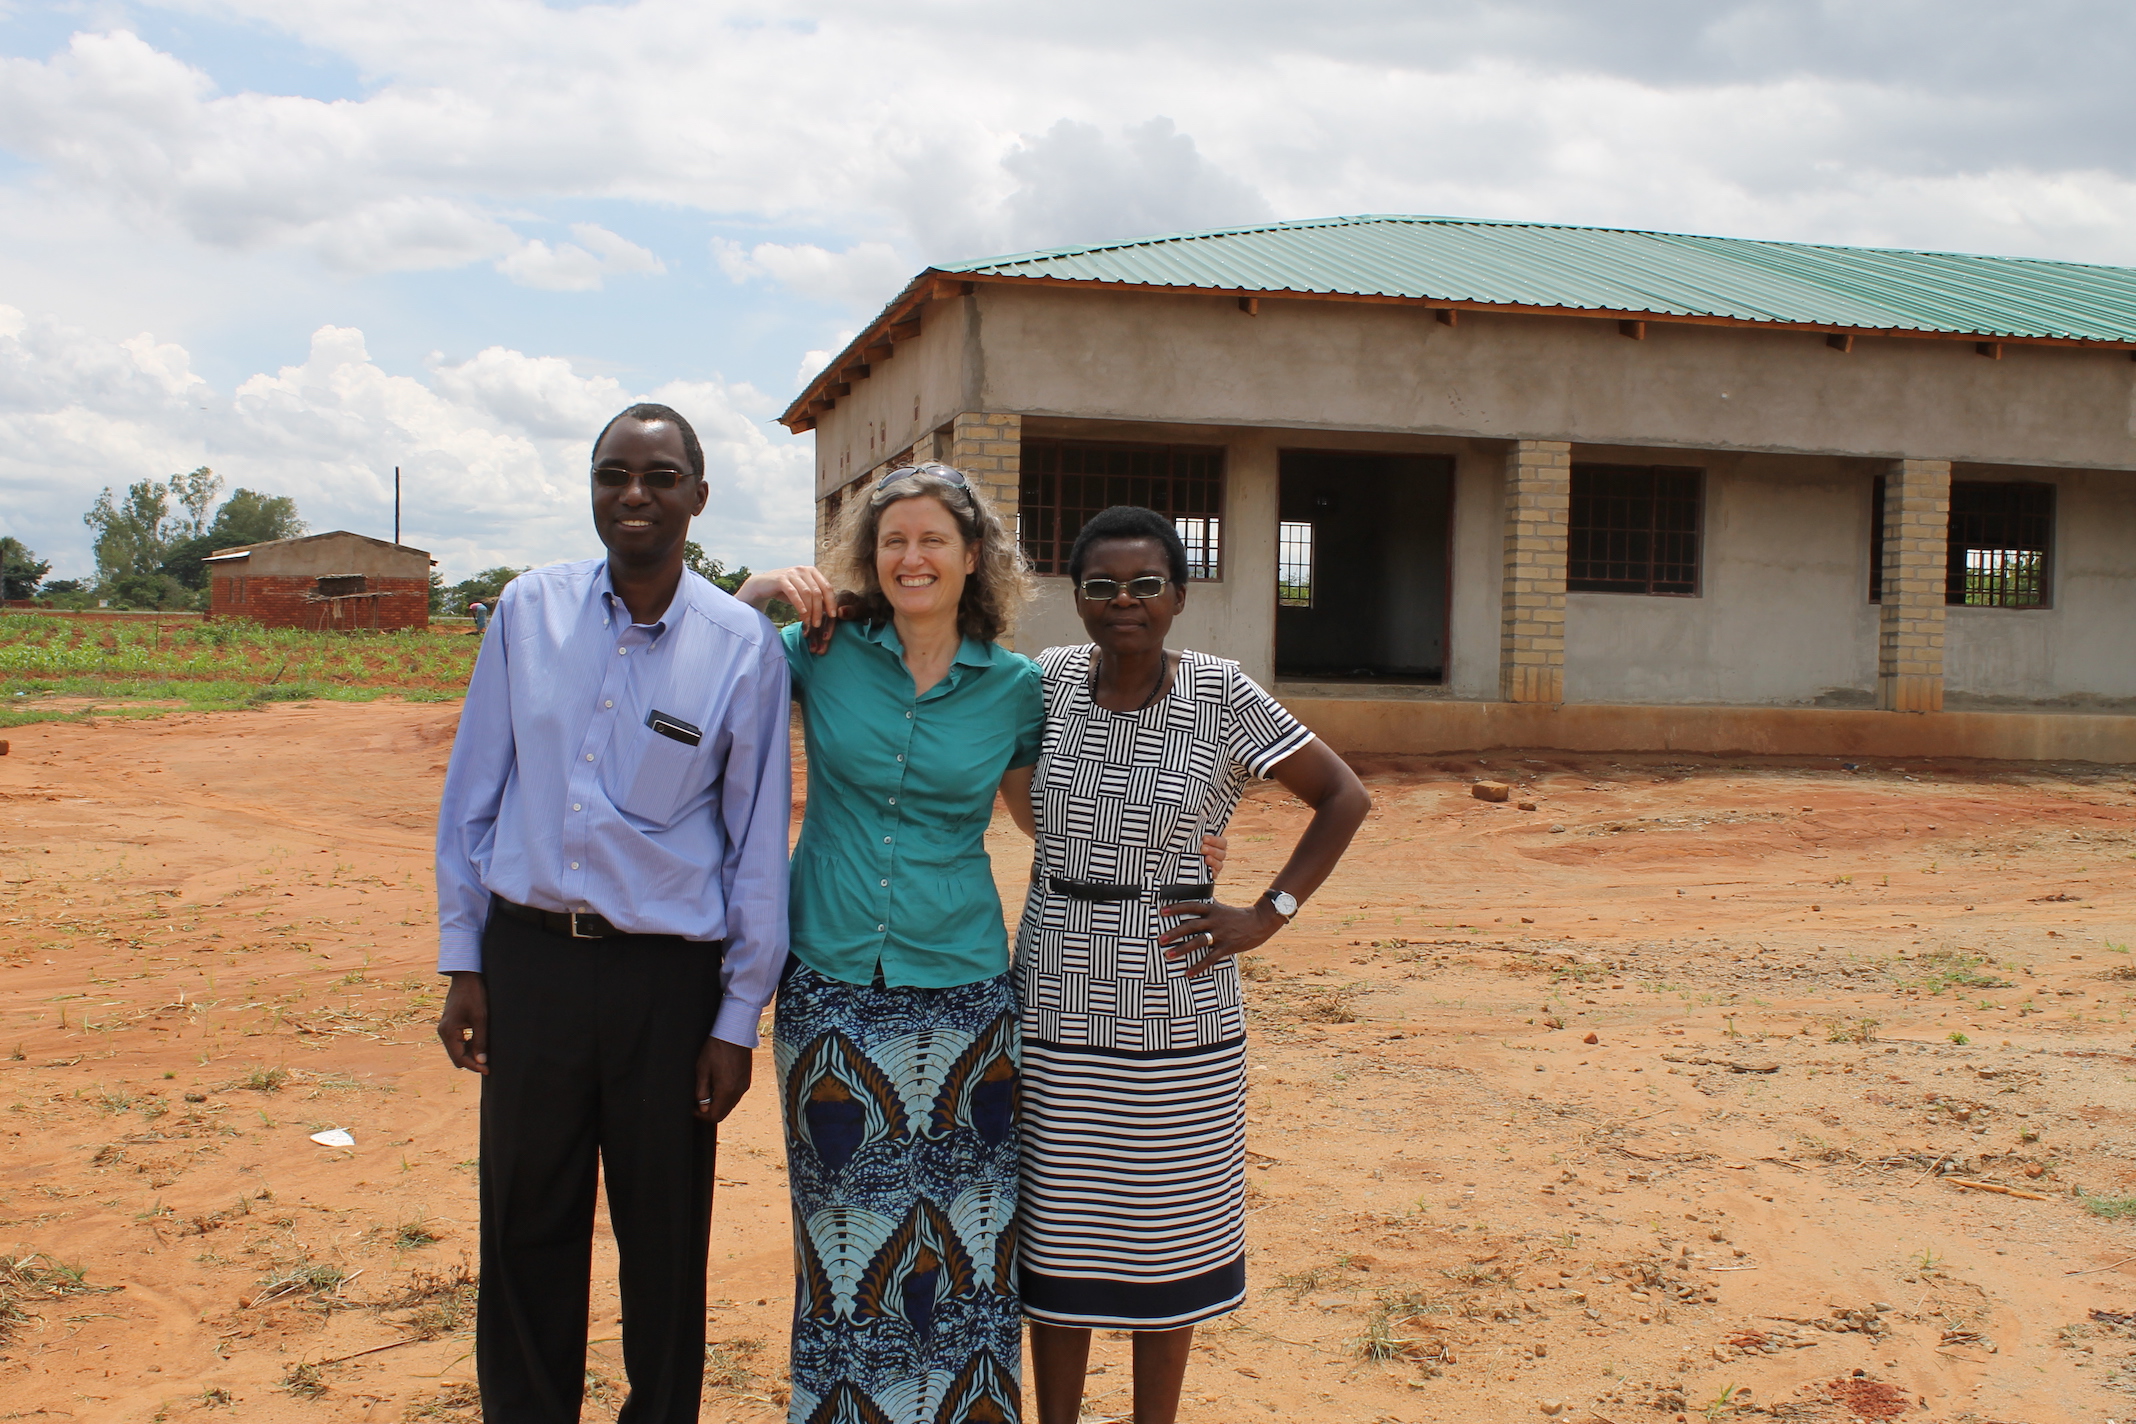 Esther Lupafya, Laifolo Dakishoni (members of SFHC) and Rachel Bezner Kerr (Friends of SFHC) standing in front of the Center.